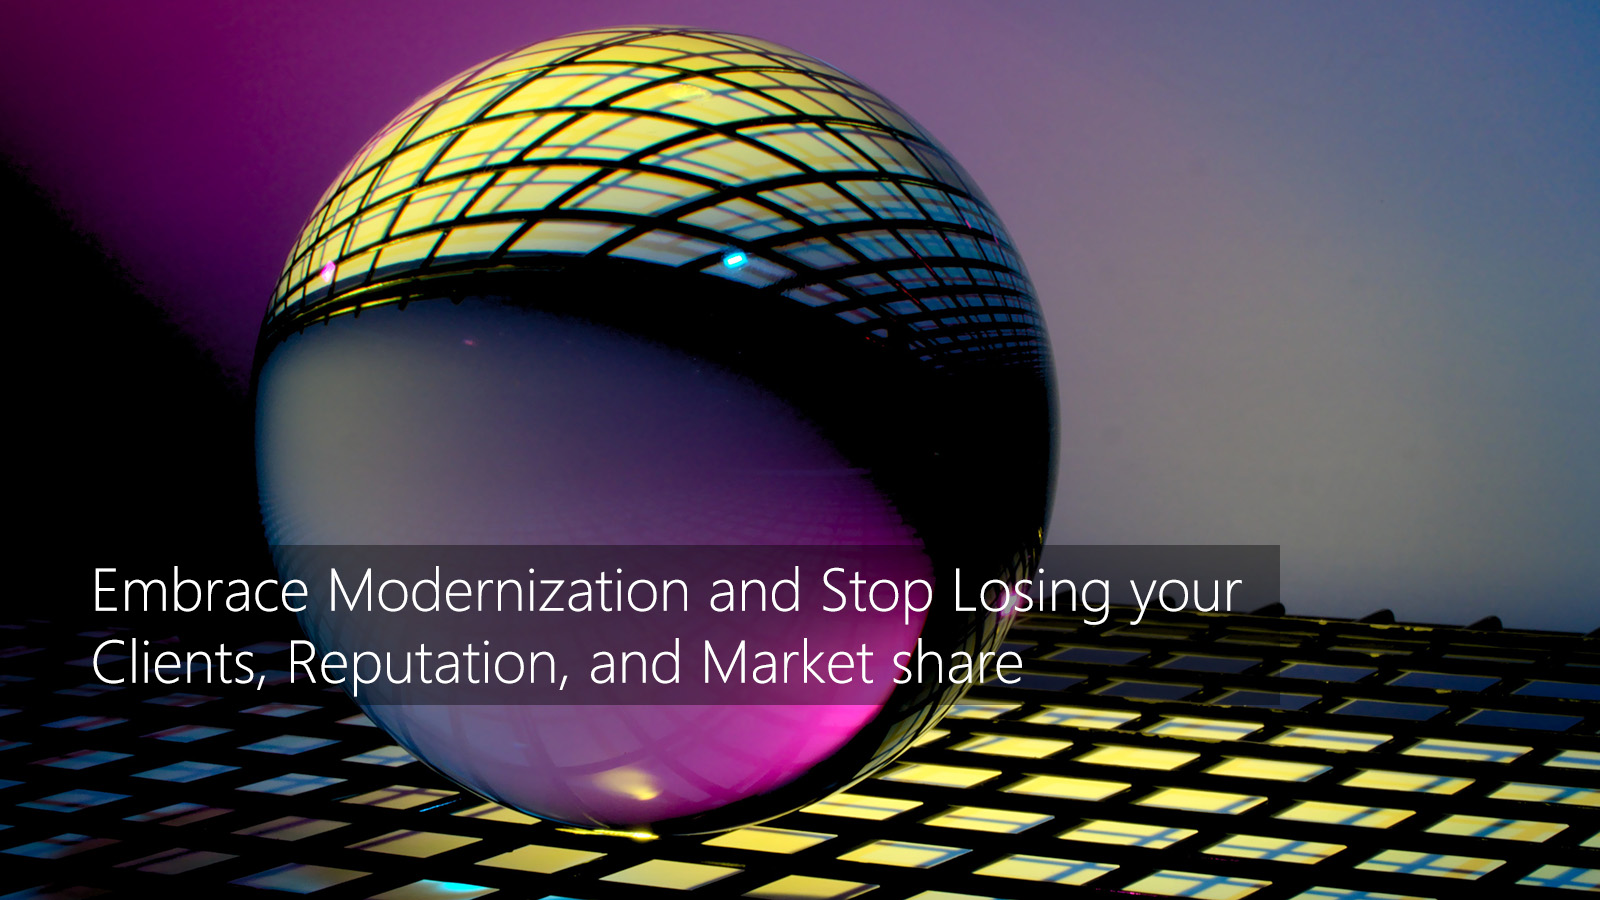 TMC-blog-embrace-modernization-and-stop-losing-your-clients-reputation-market-share